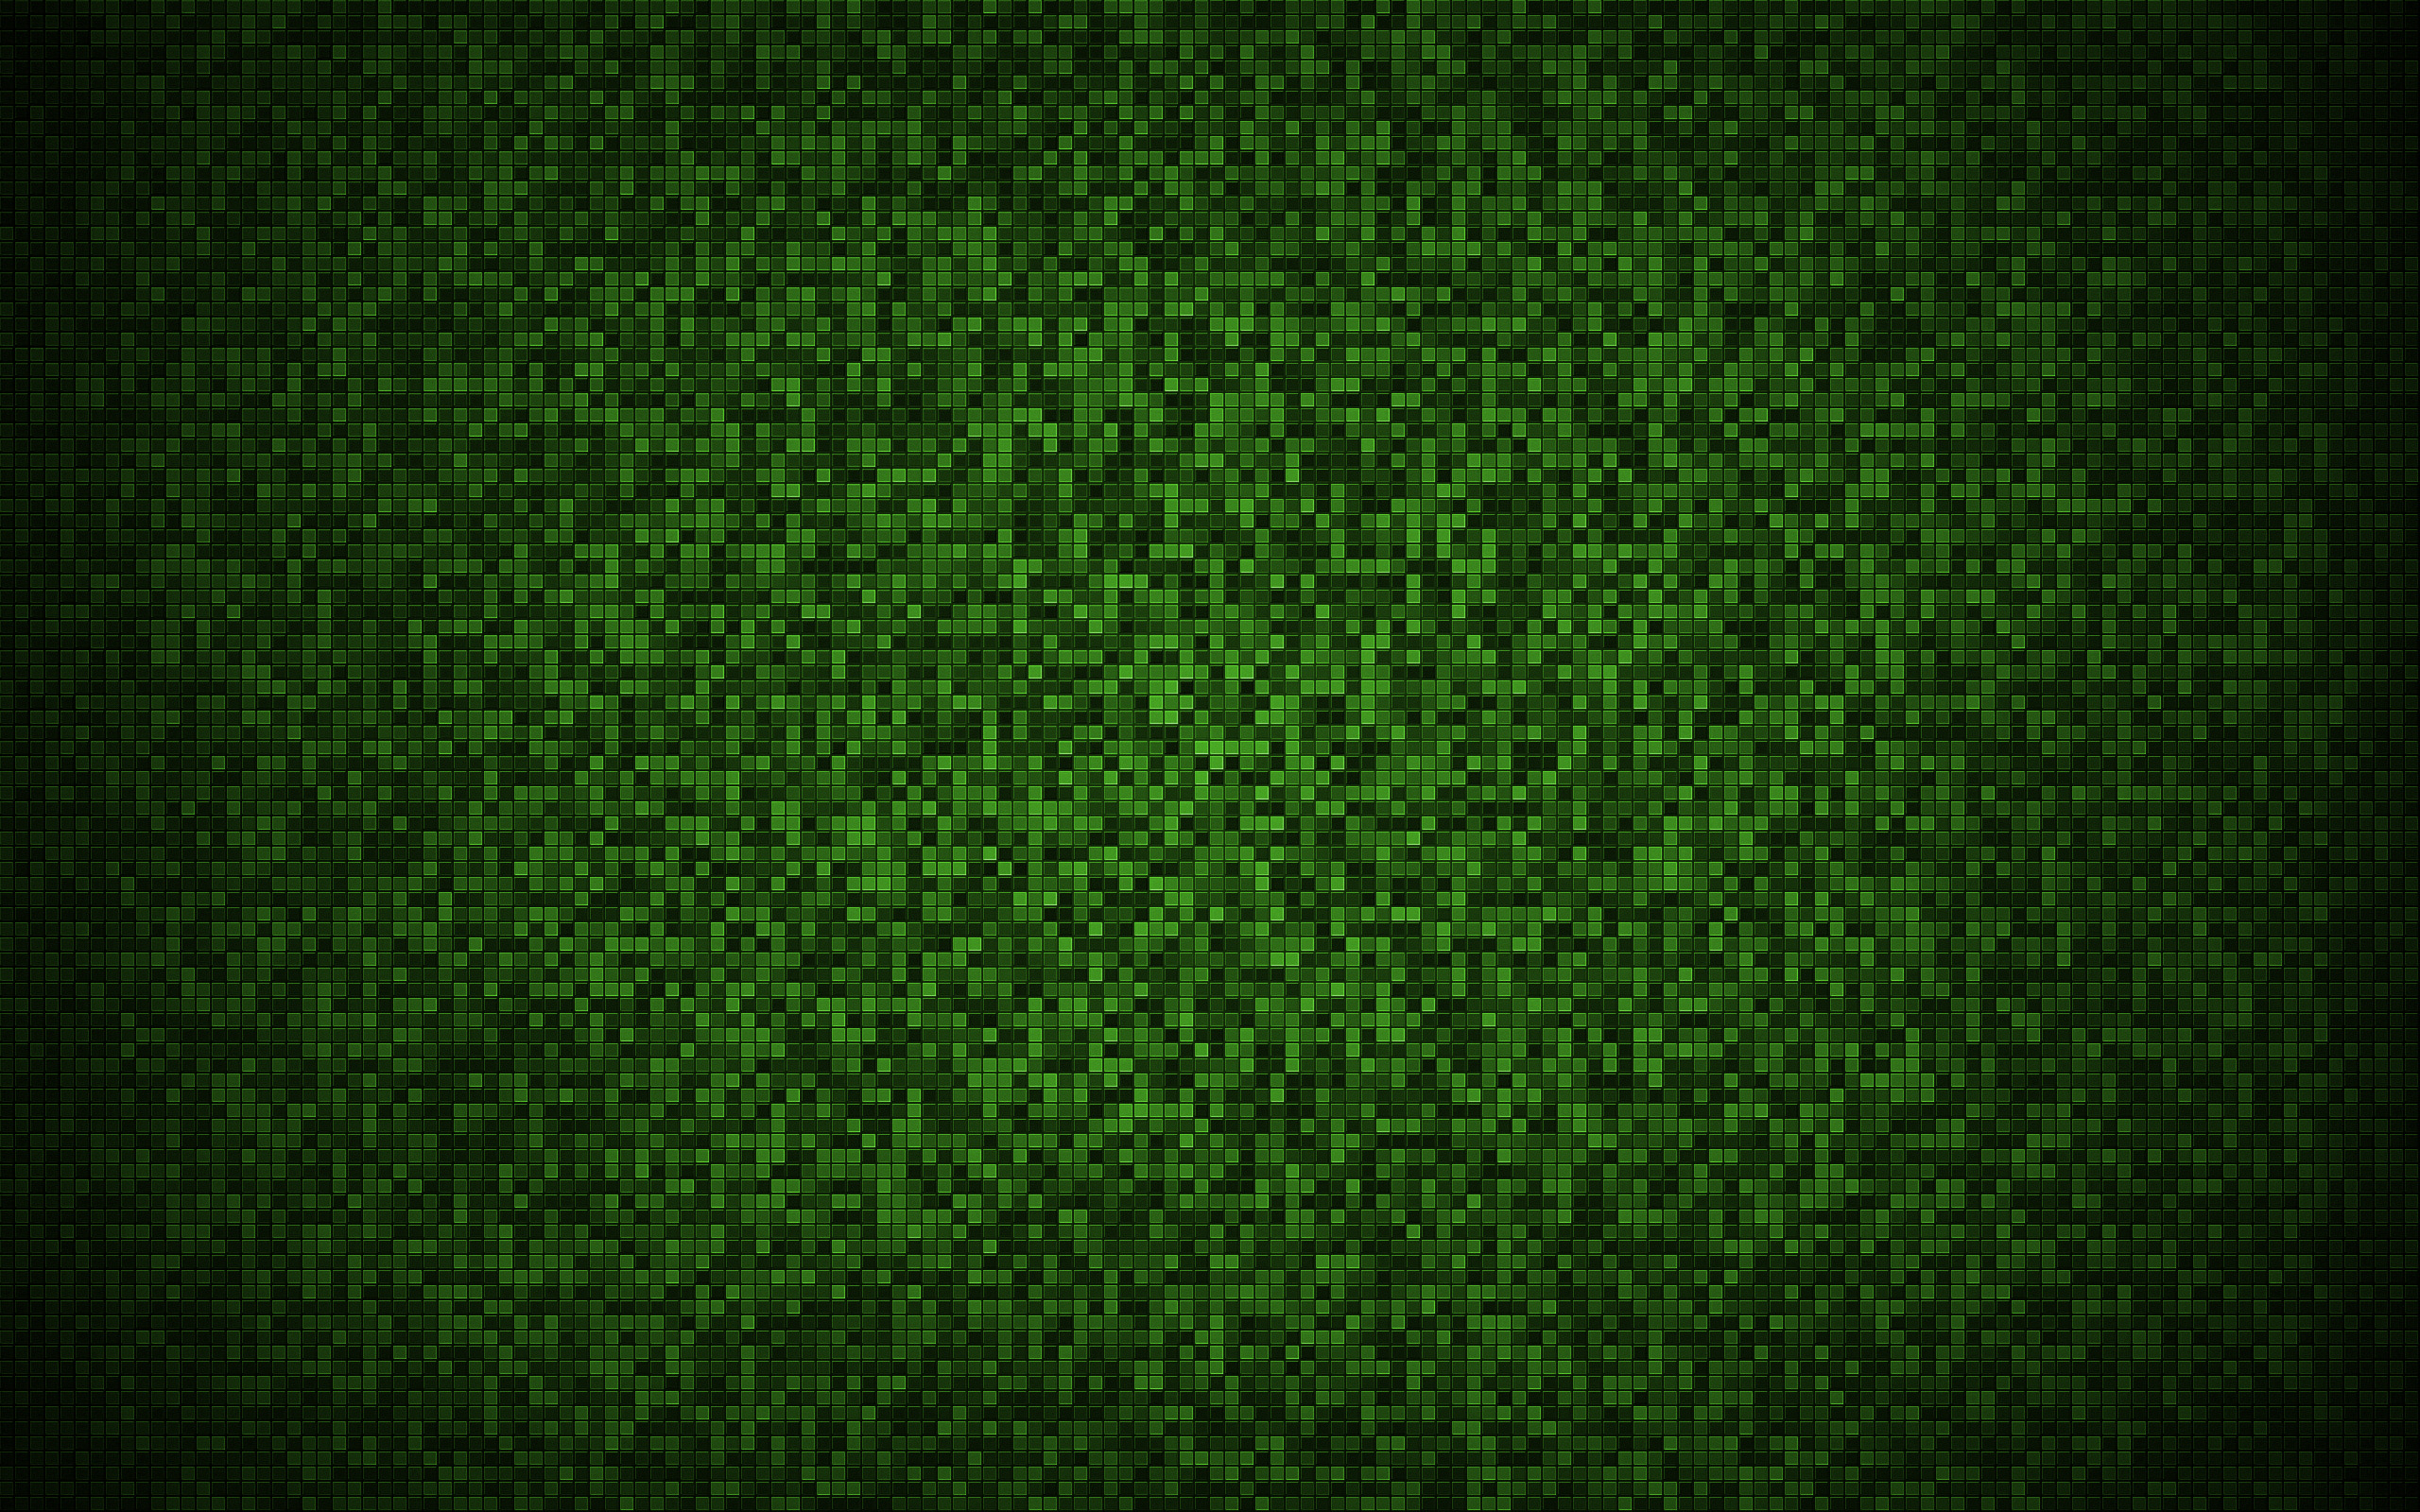 Download wallpaper green pixel texture, green squares texture, pixel background, green small tile texture, creative green background, green abstract background for desktop with resolution 2560x1600. High Quality HD picture wallpaper